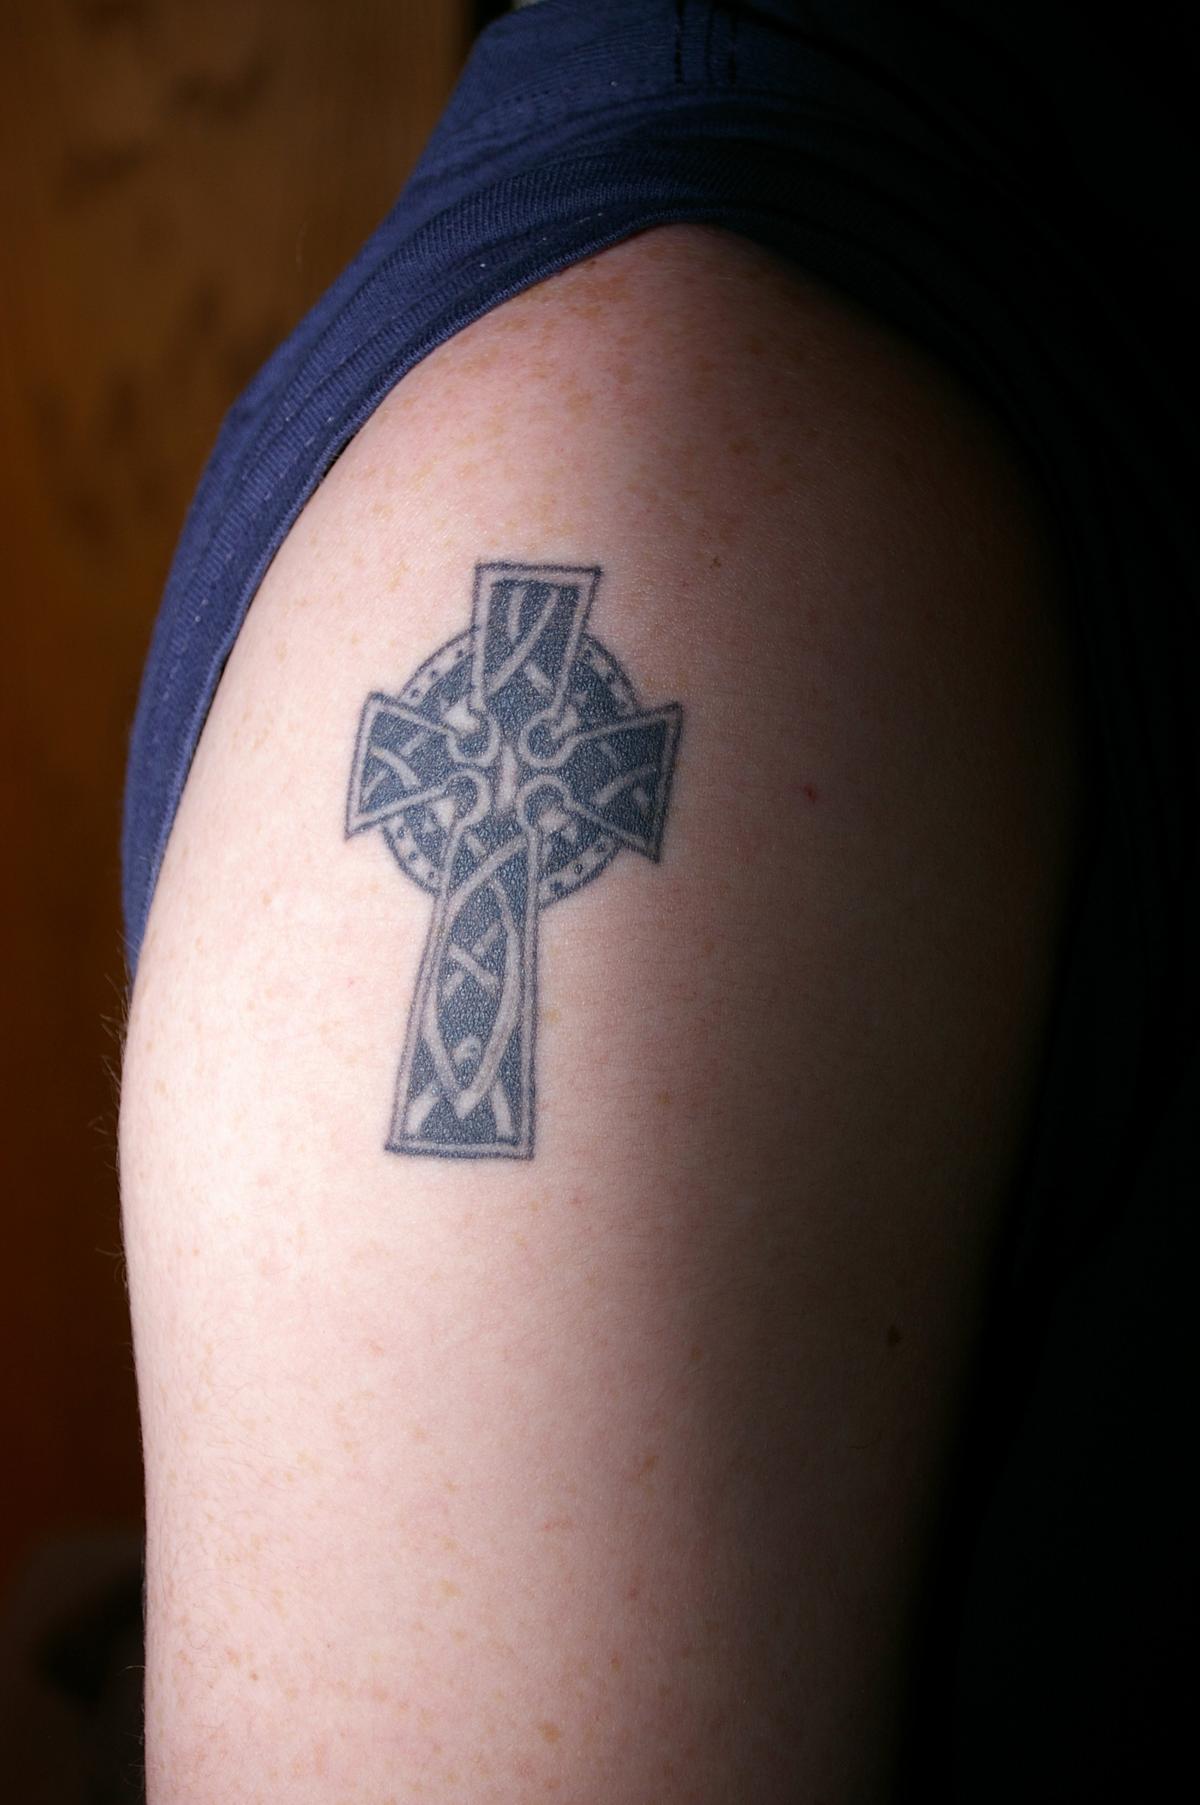 These Cross Tattoos With Wings are Sure to Look Uniquely 